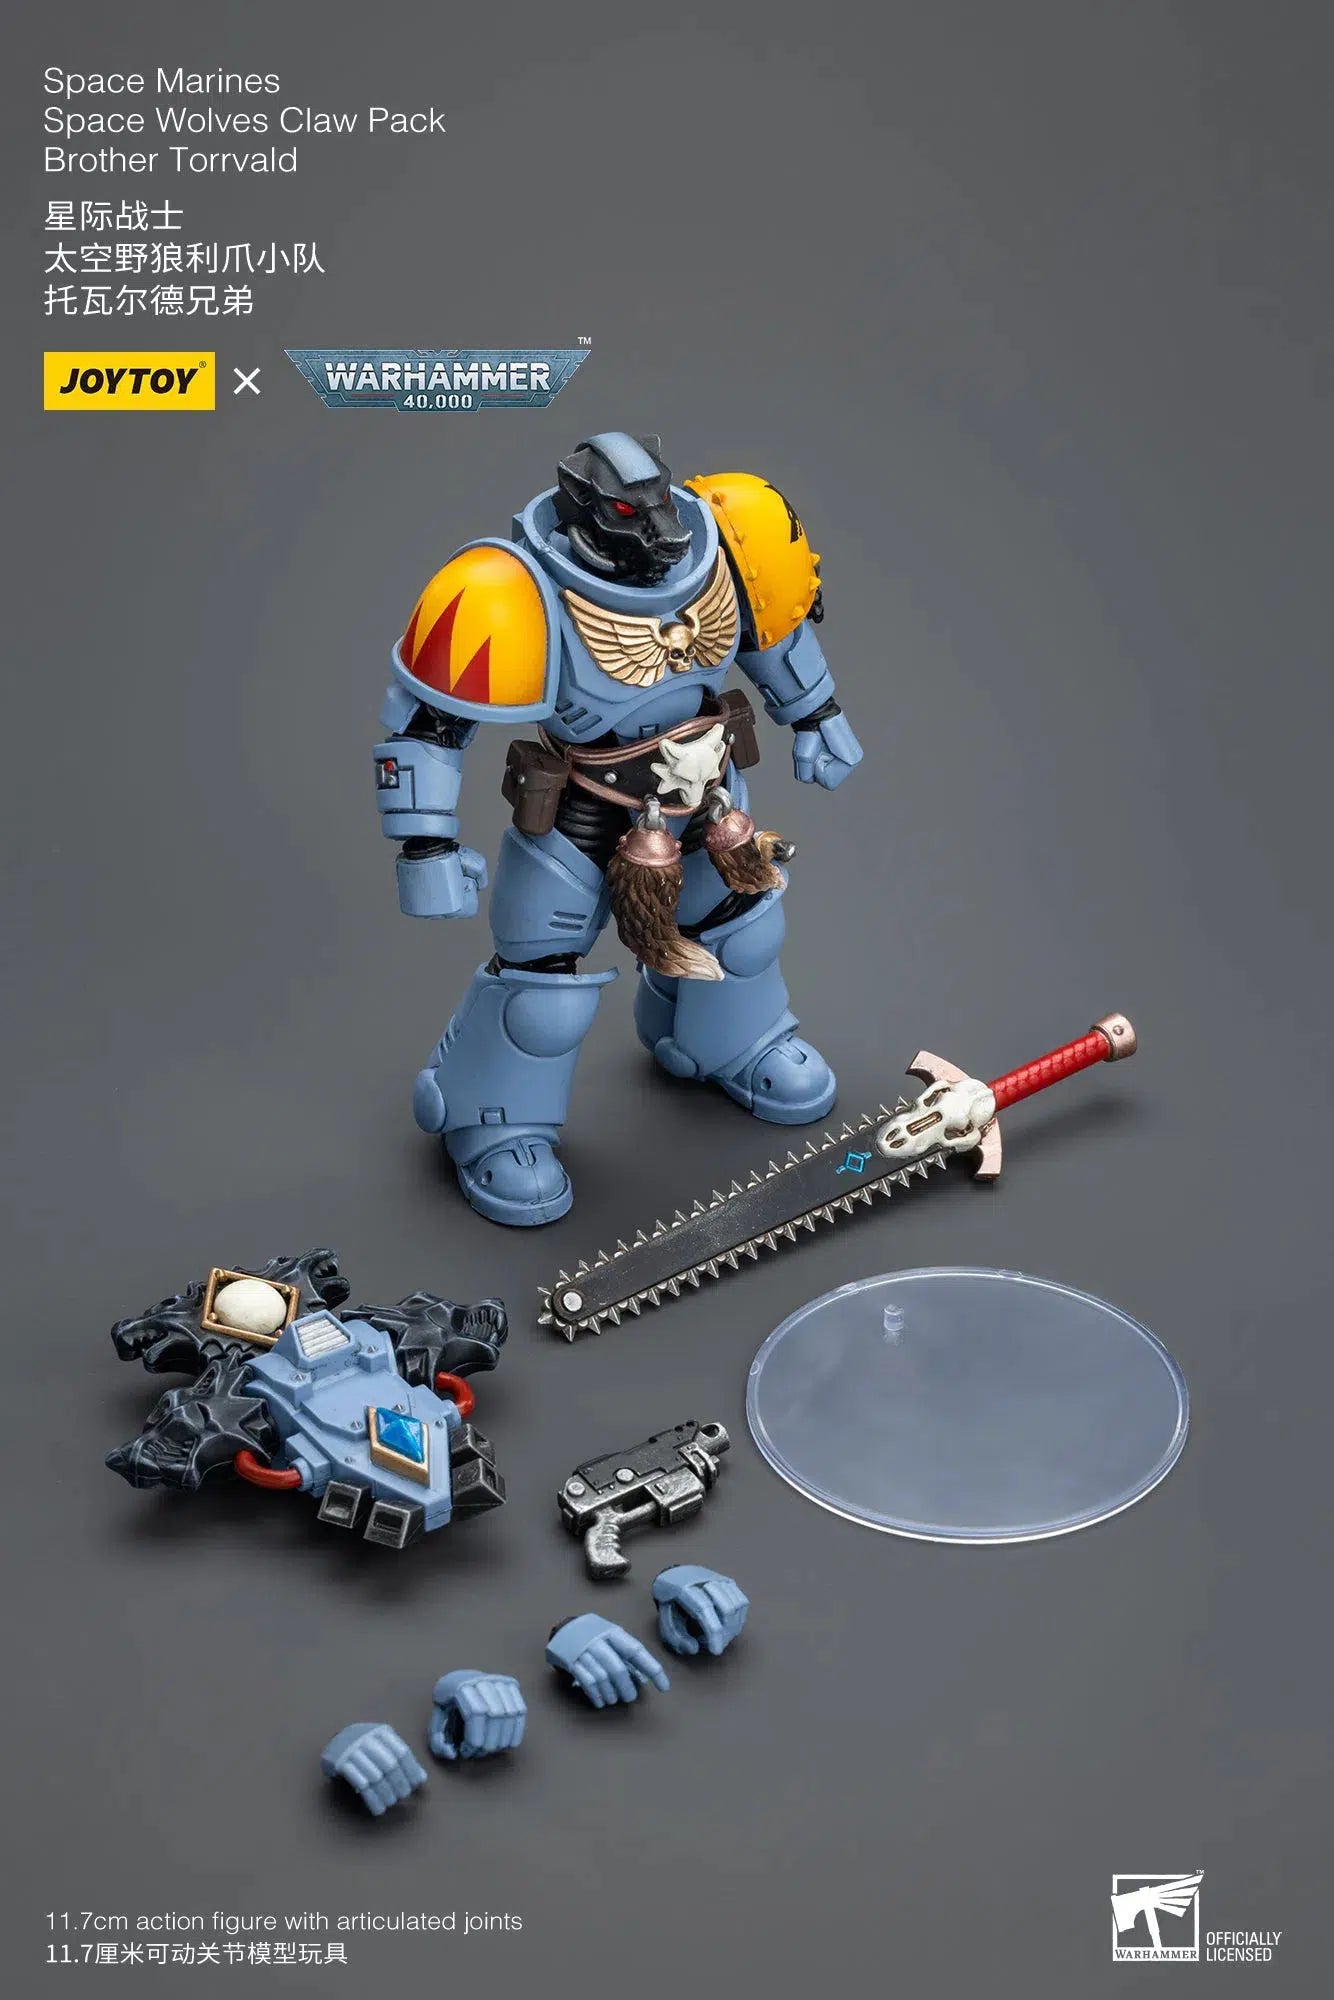 Warhammer 40K: Space Wolves: Claw Pack: Brother Torrvald: Joy Toy